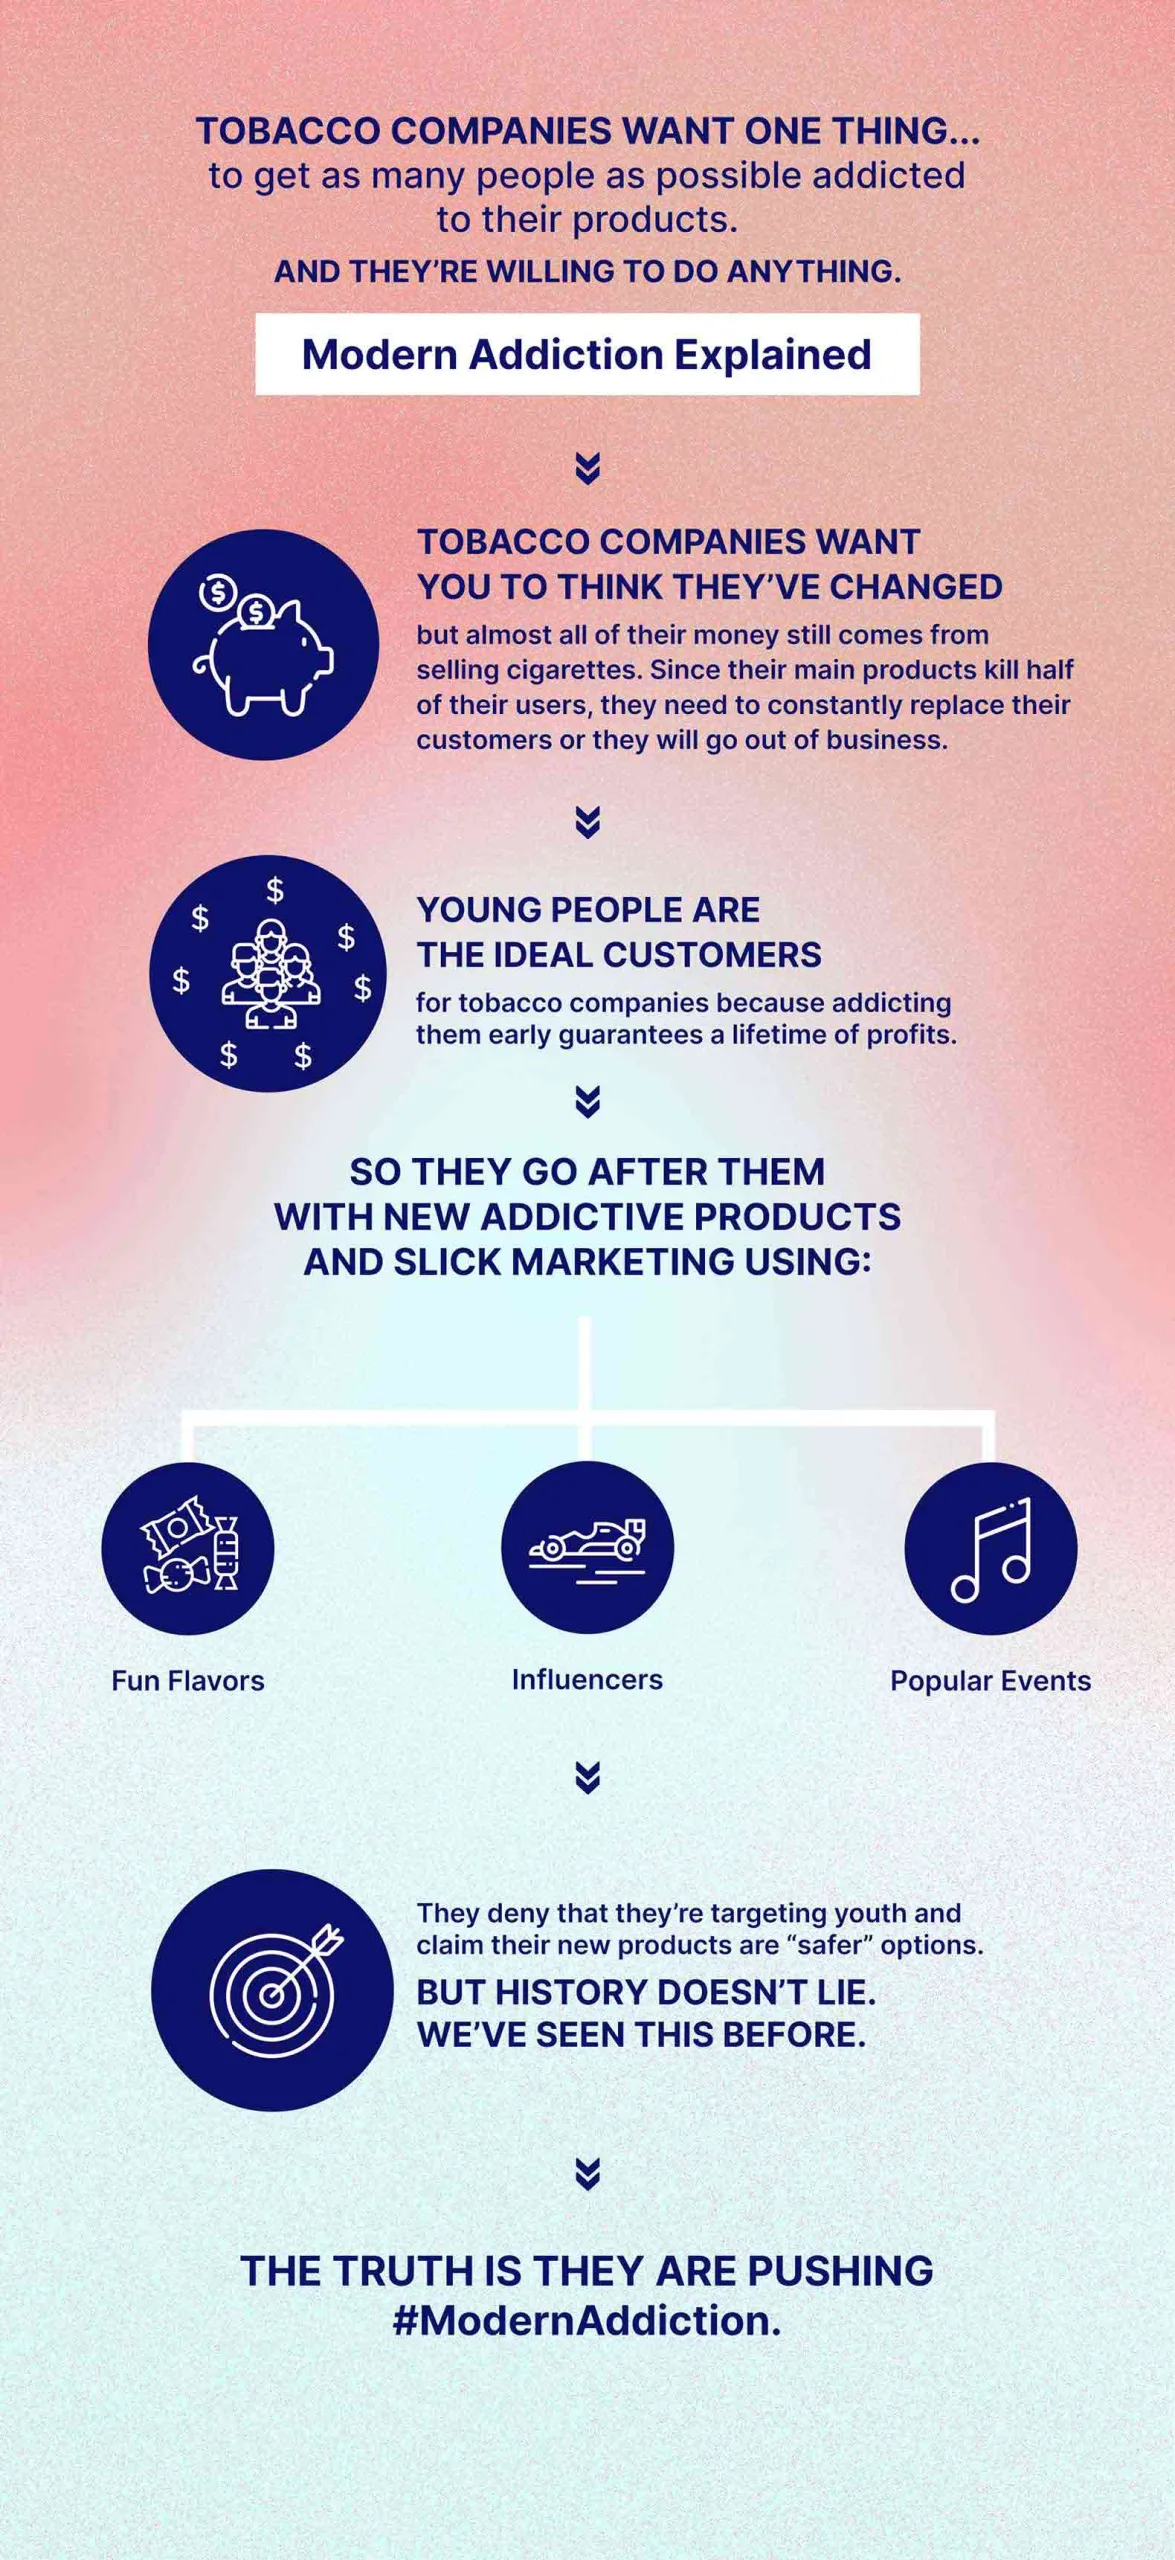 An infographic highlighting the ways the tobacco industry targets young people with fun flavors and sleek product design